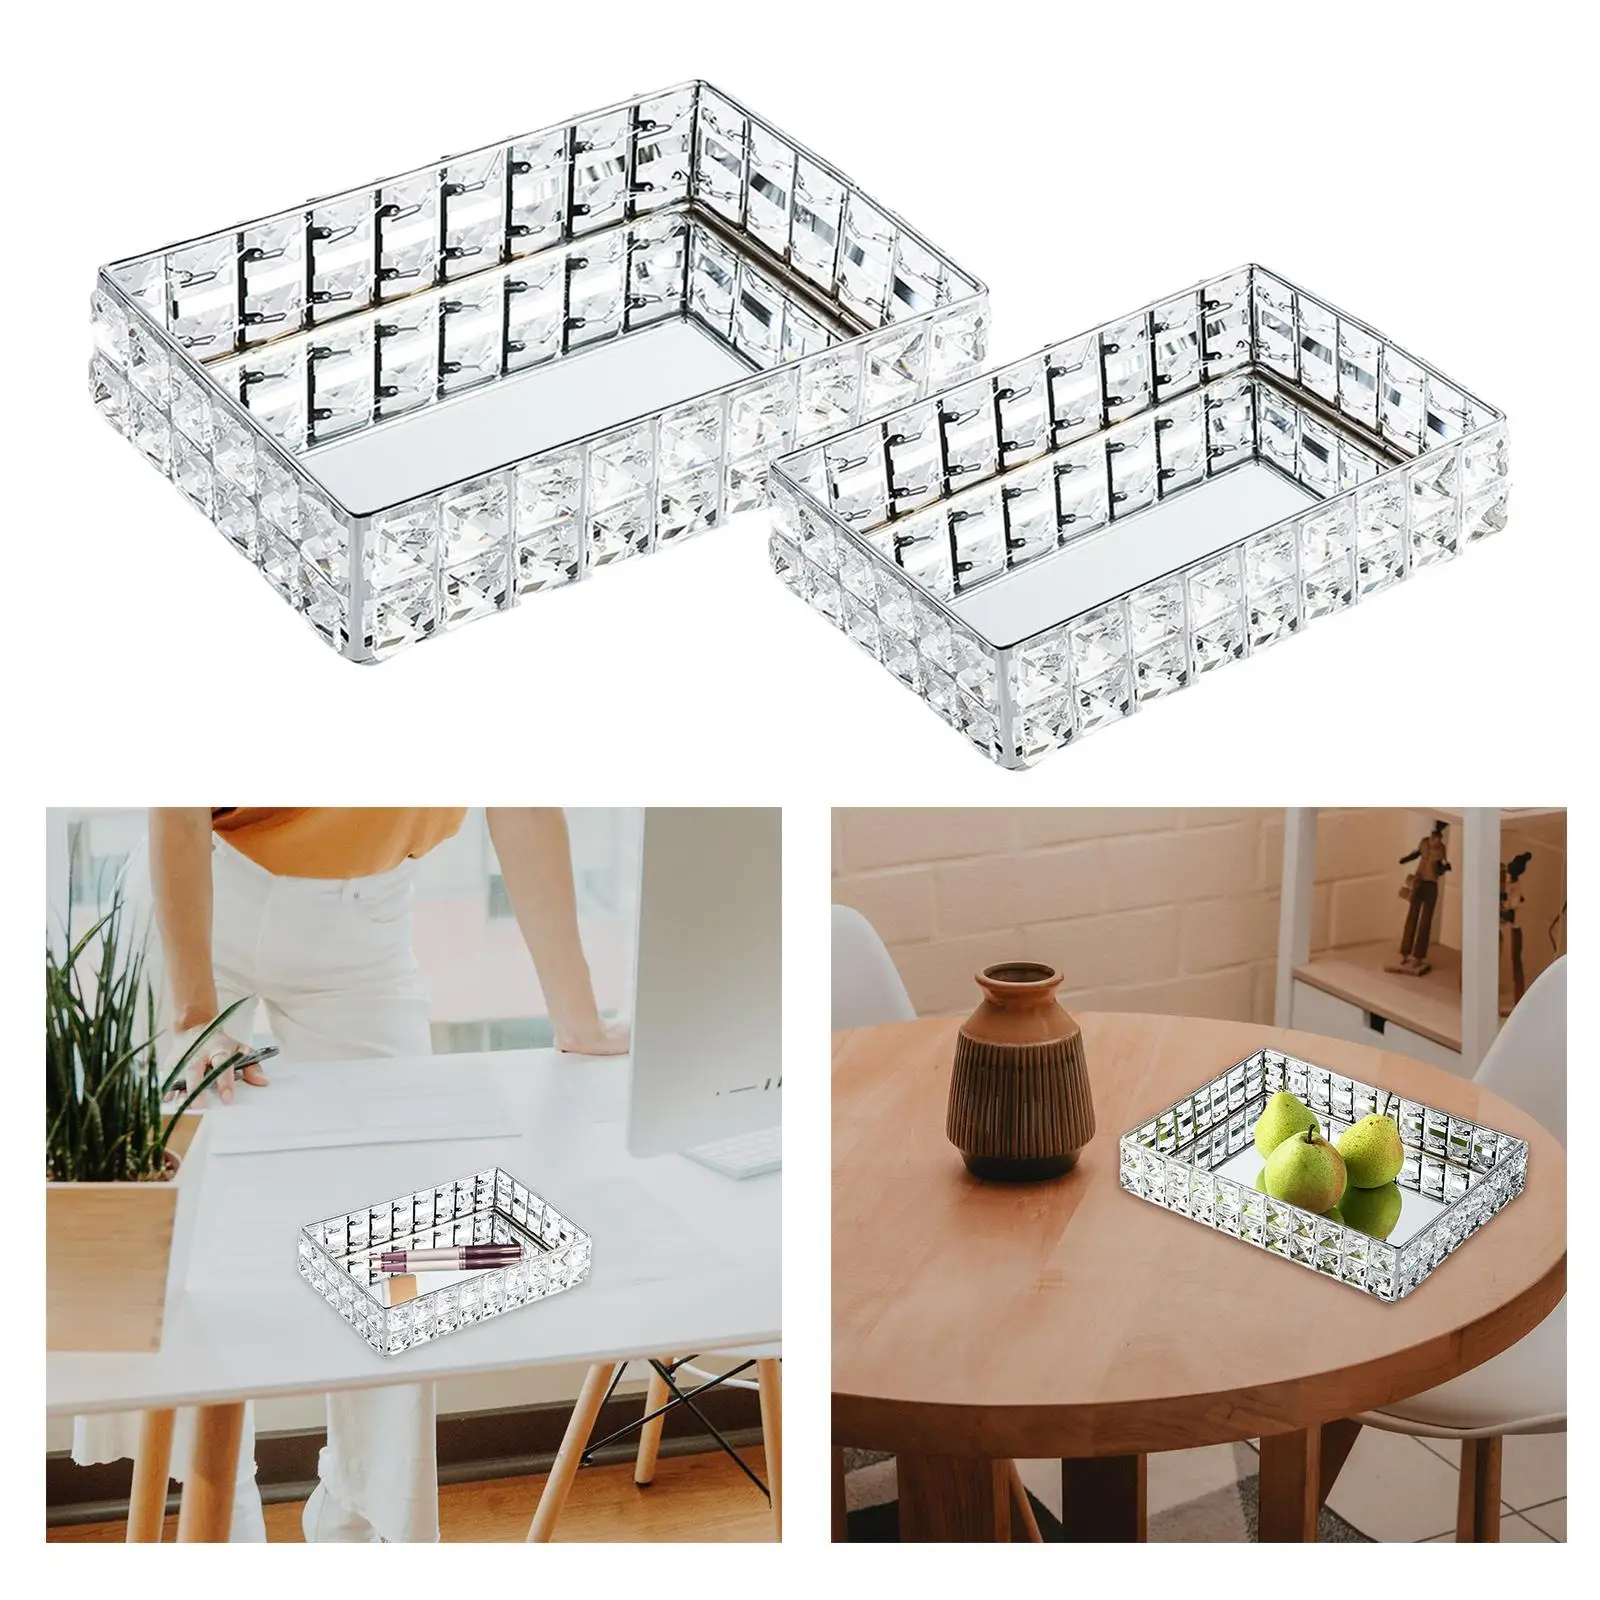 Crystal Mirrored Tray Ornate Wedding Table Centre Candle Plate Chic Gifts